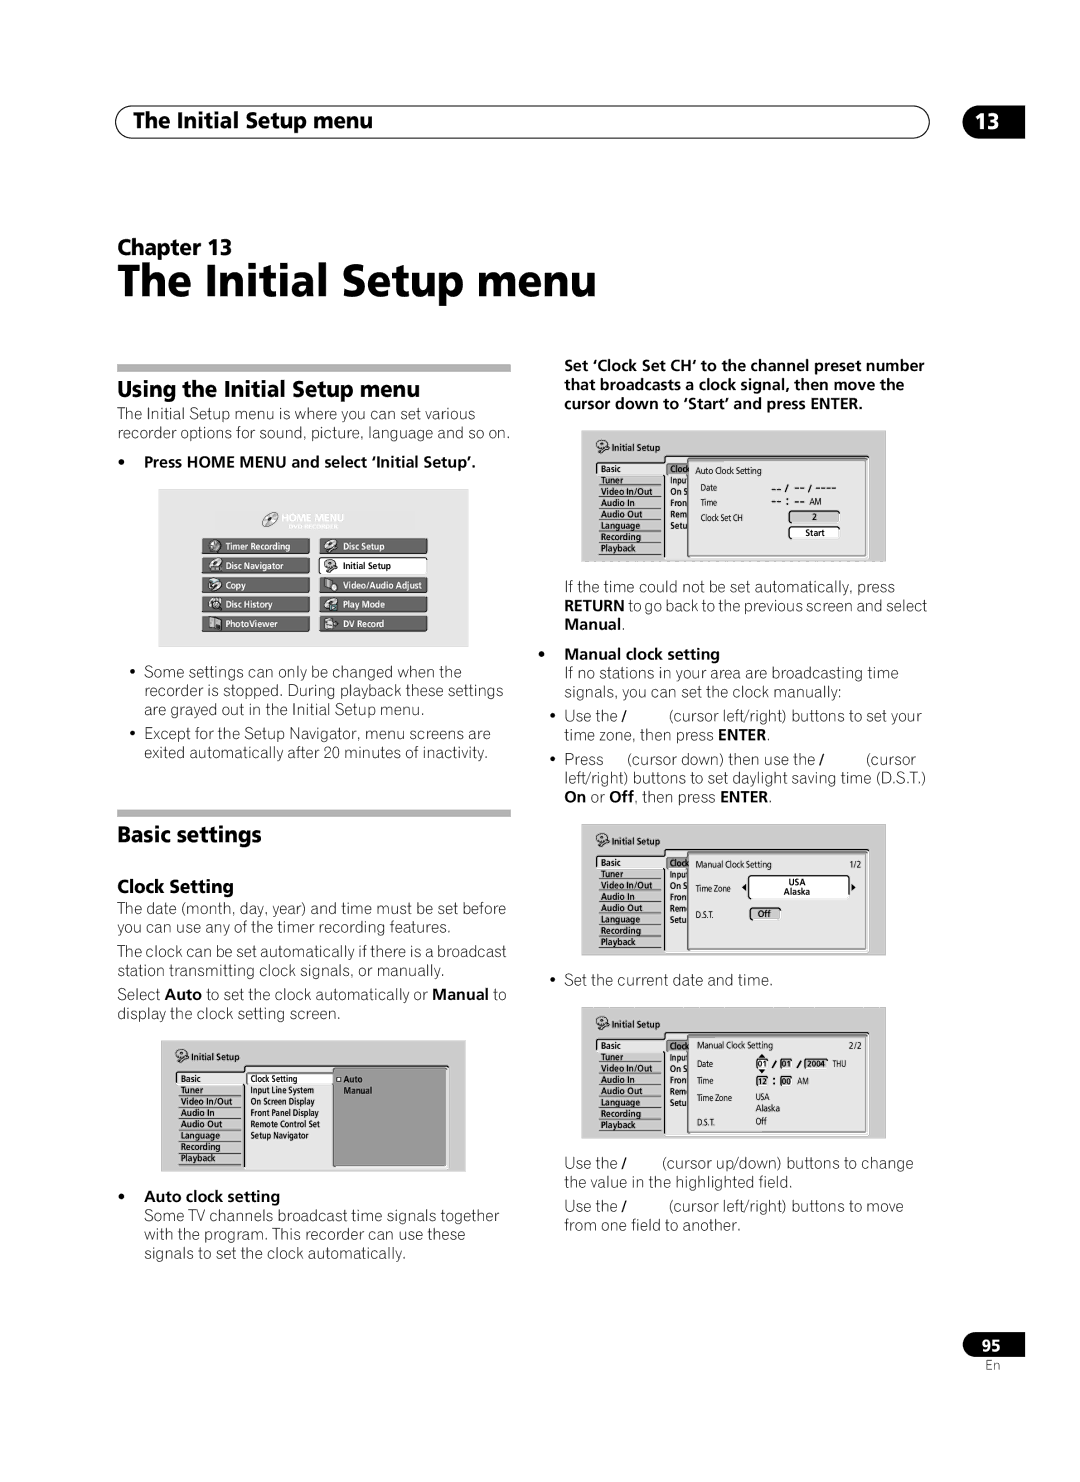 Pioneer PRV-9200 operating instructions Initial Setup menu Chapter, Using the Initial Setup menu, Clock Setting 